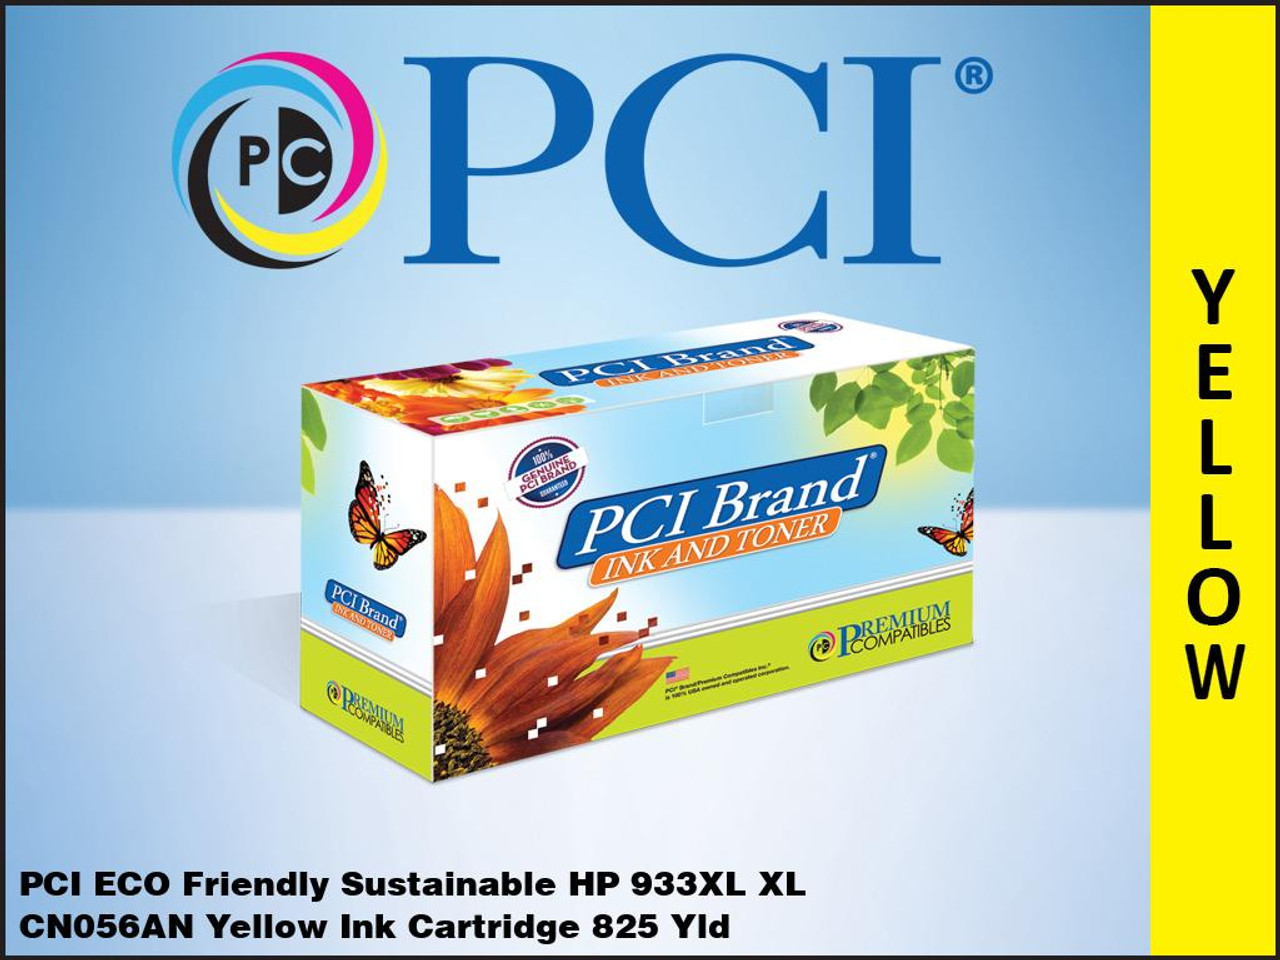 PCI Brand Remanufactured HP 933XL CN056AN Yellow Inkjet 825 Page for HP 6060, 6100, 6600, 6700, 7610, 7612 - Premium Compatibles